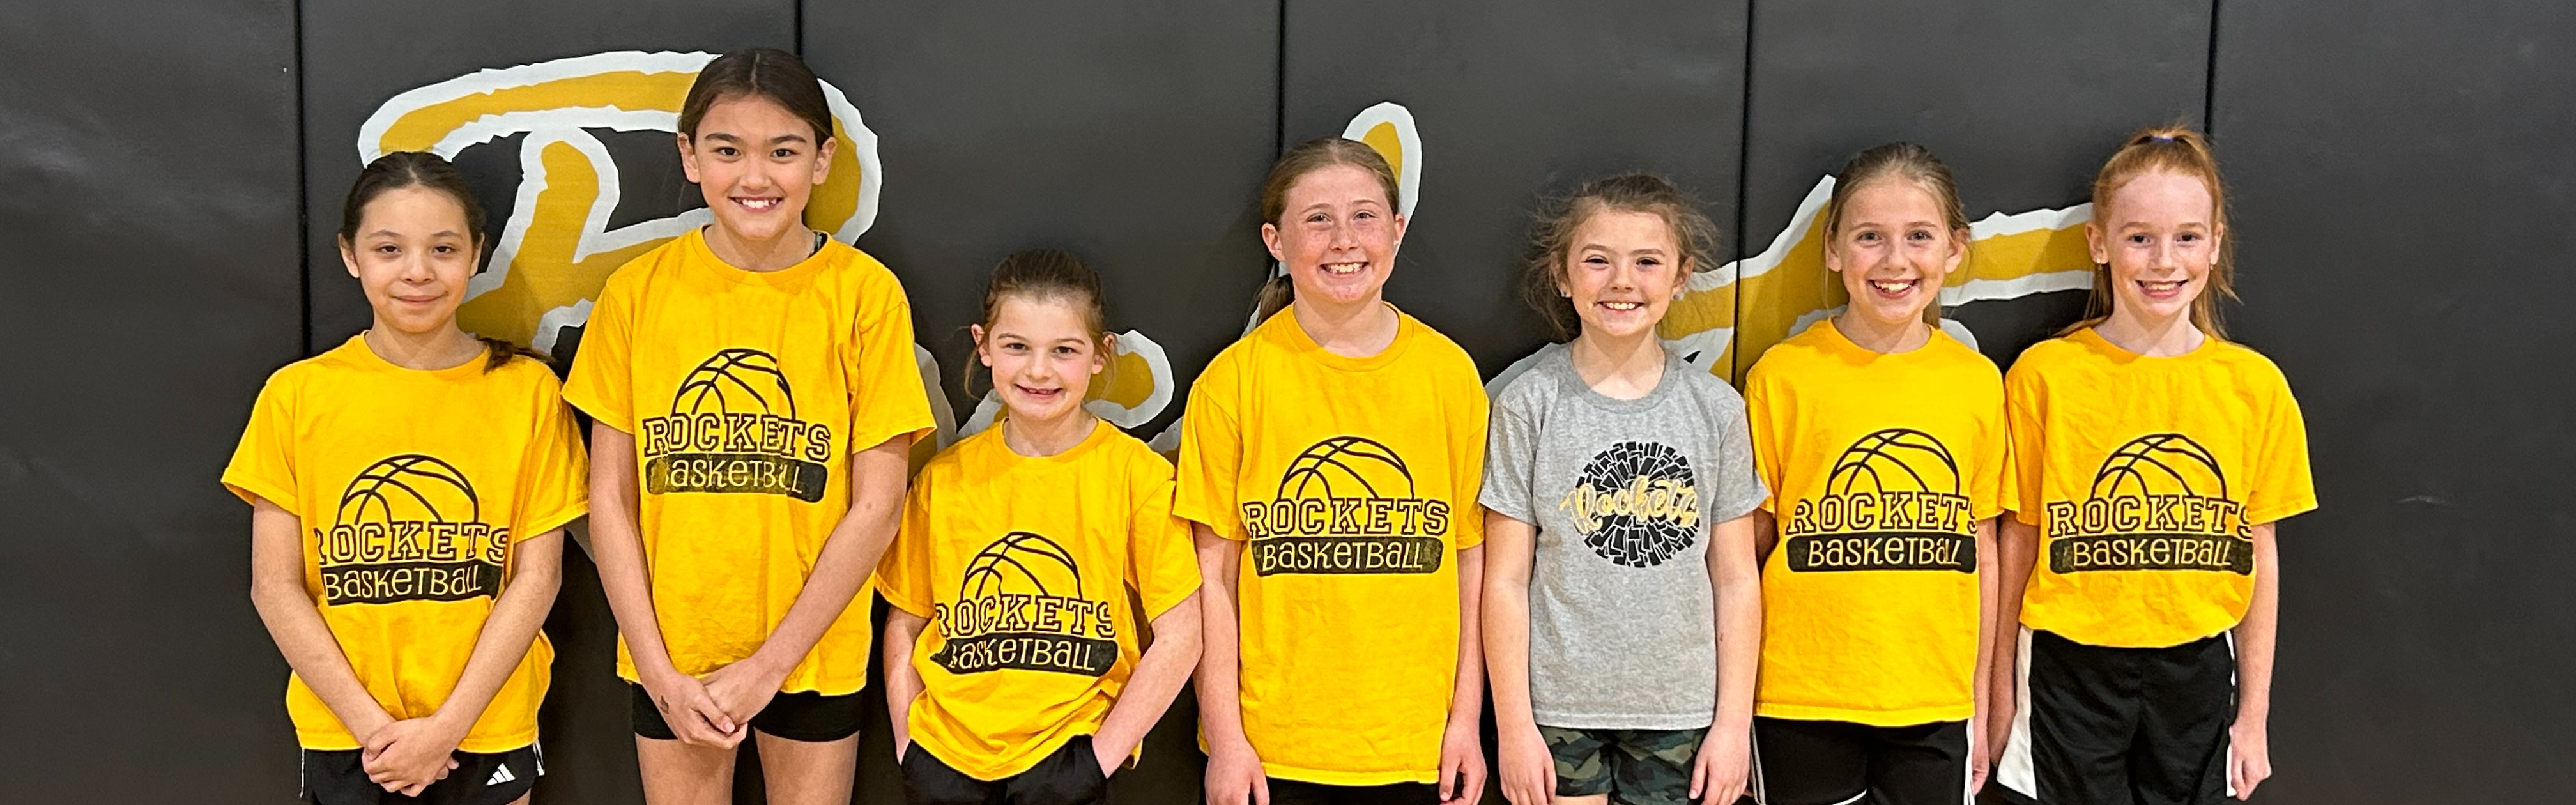 Picture of Eddyville elementary basketball girls standing against mat in high school gym